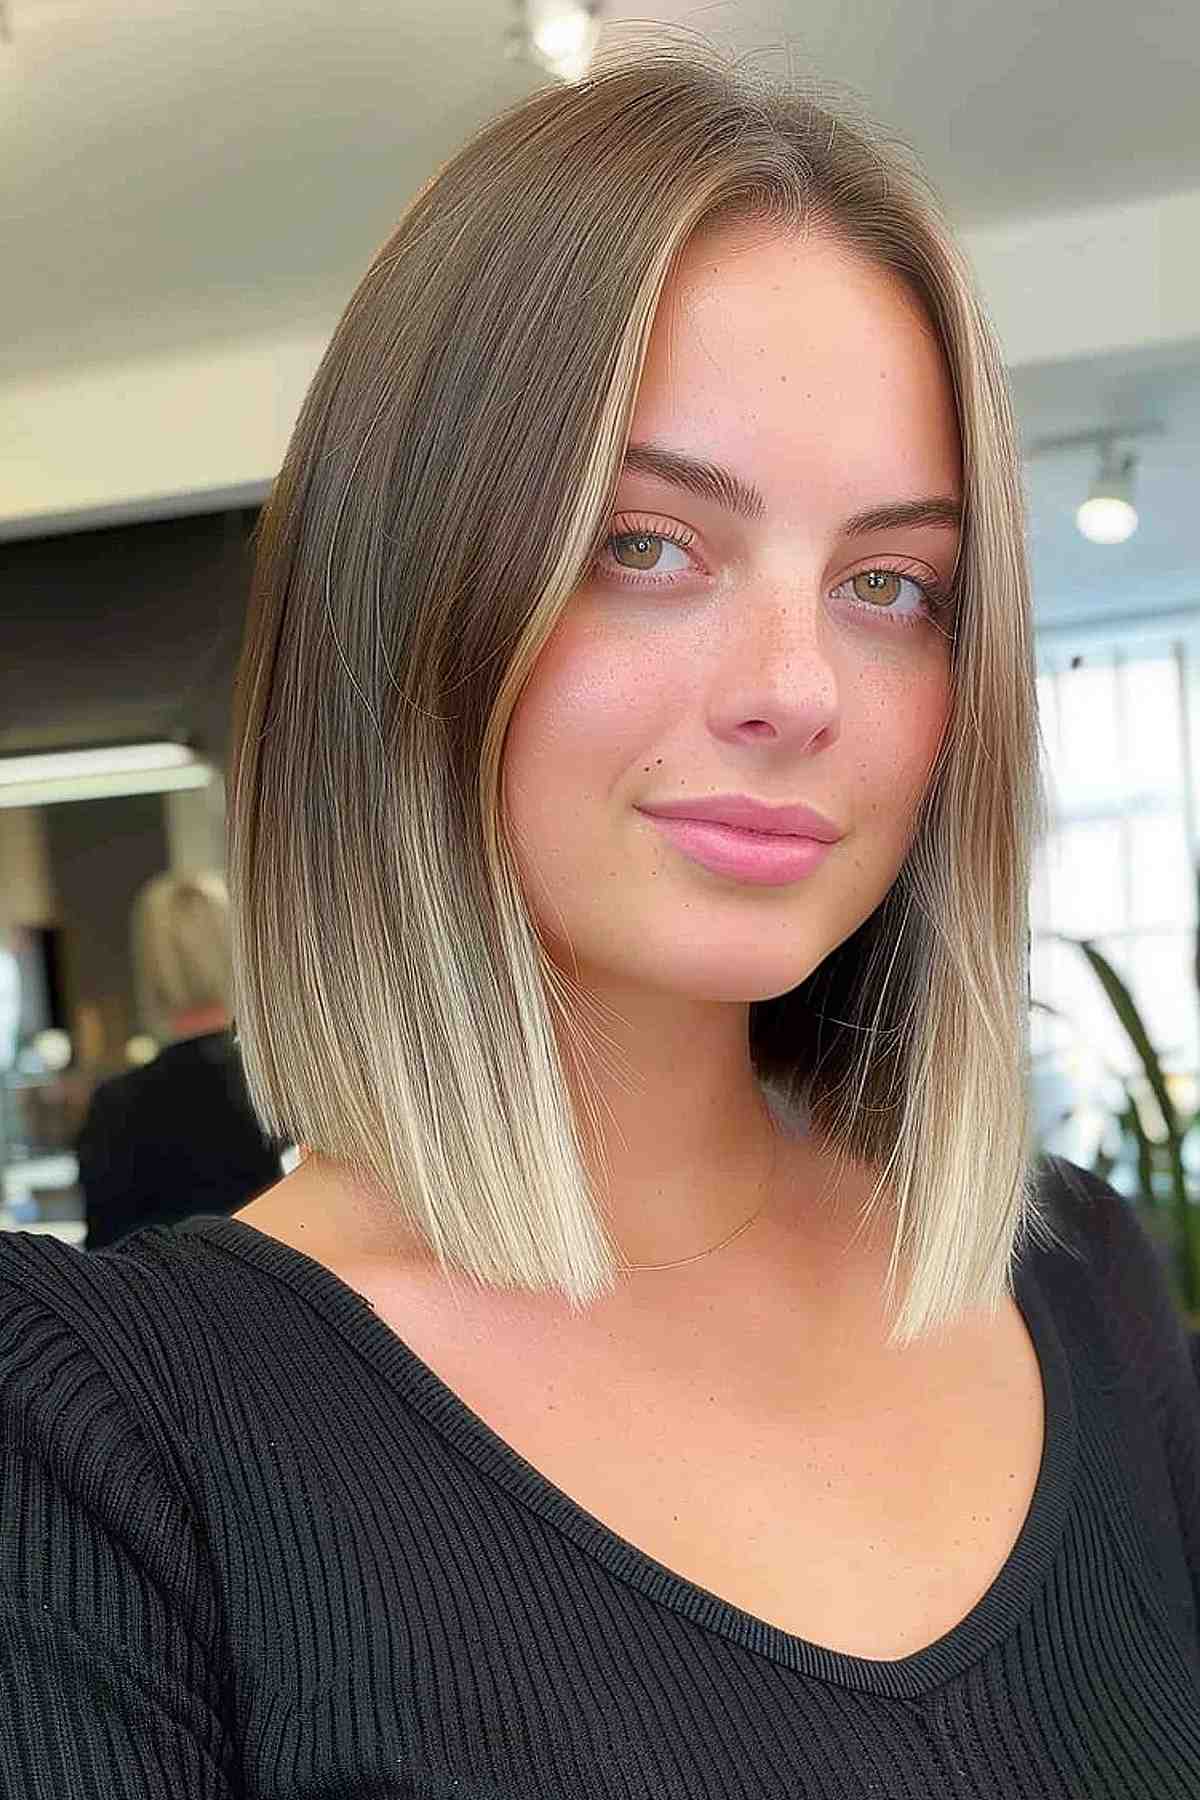 Collarbone-length sleek ombre lob to flatter round facial features.